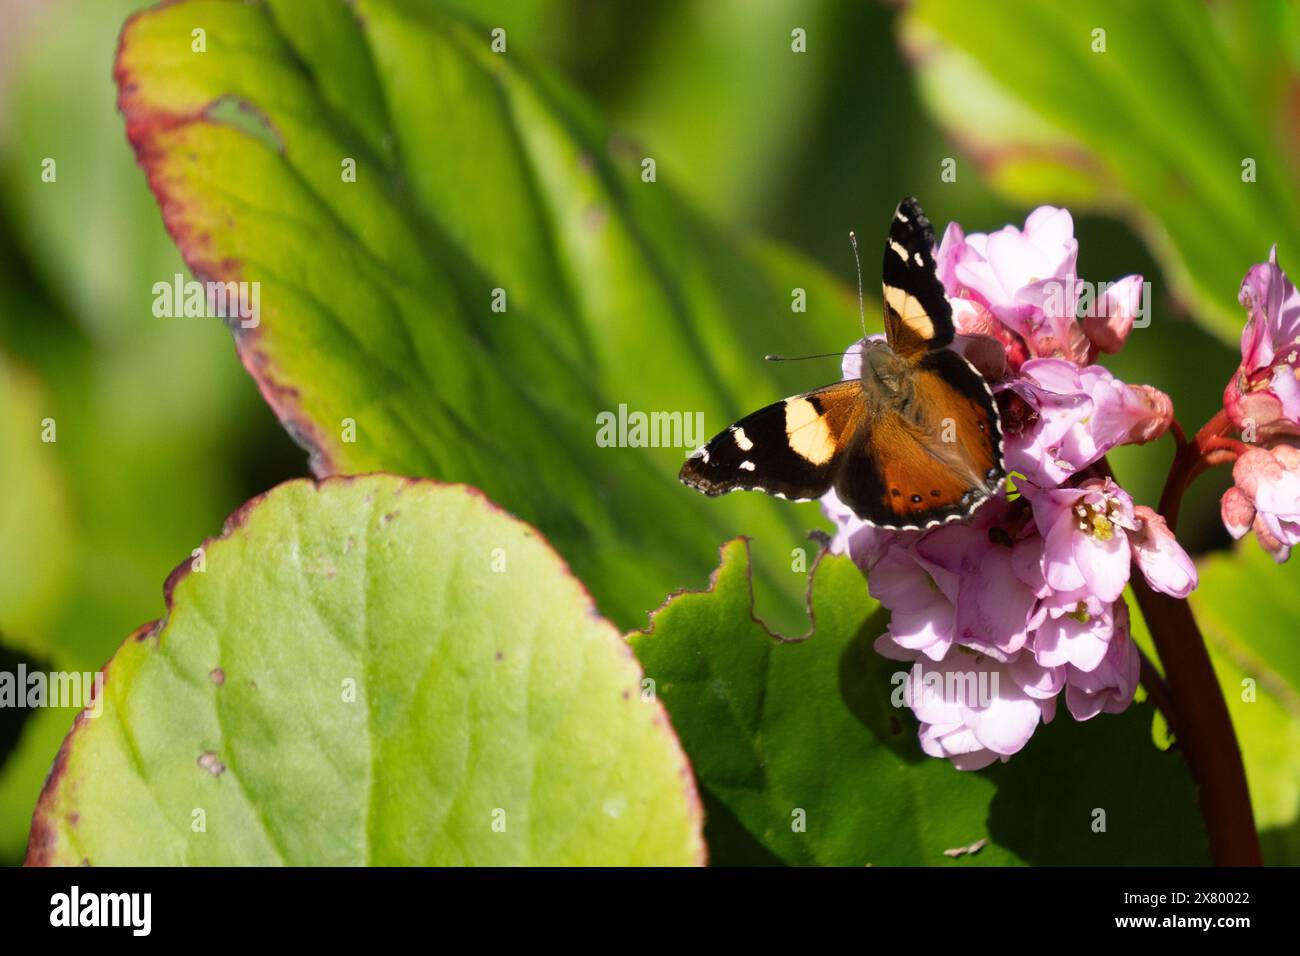 Horizontal image of yellow admiral butterfly (Vanessa itea). It is feeding on a cluster of pink bergenia flowers. Stock Photo